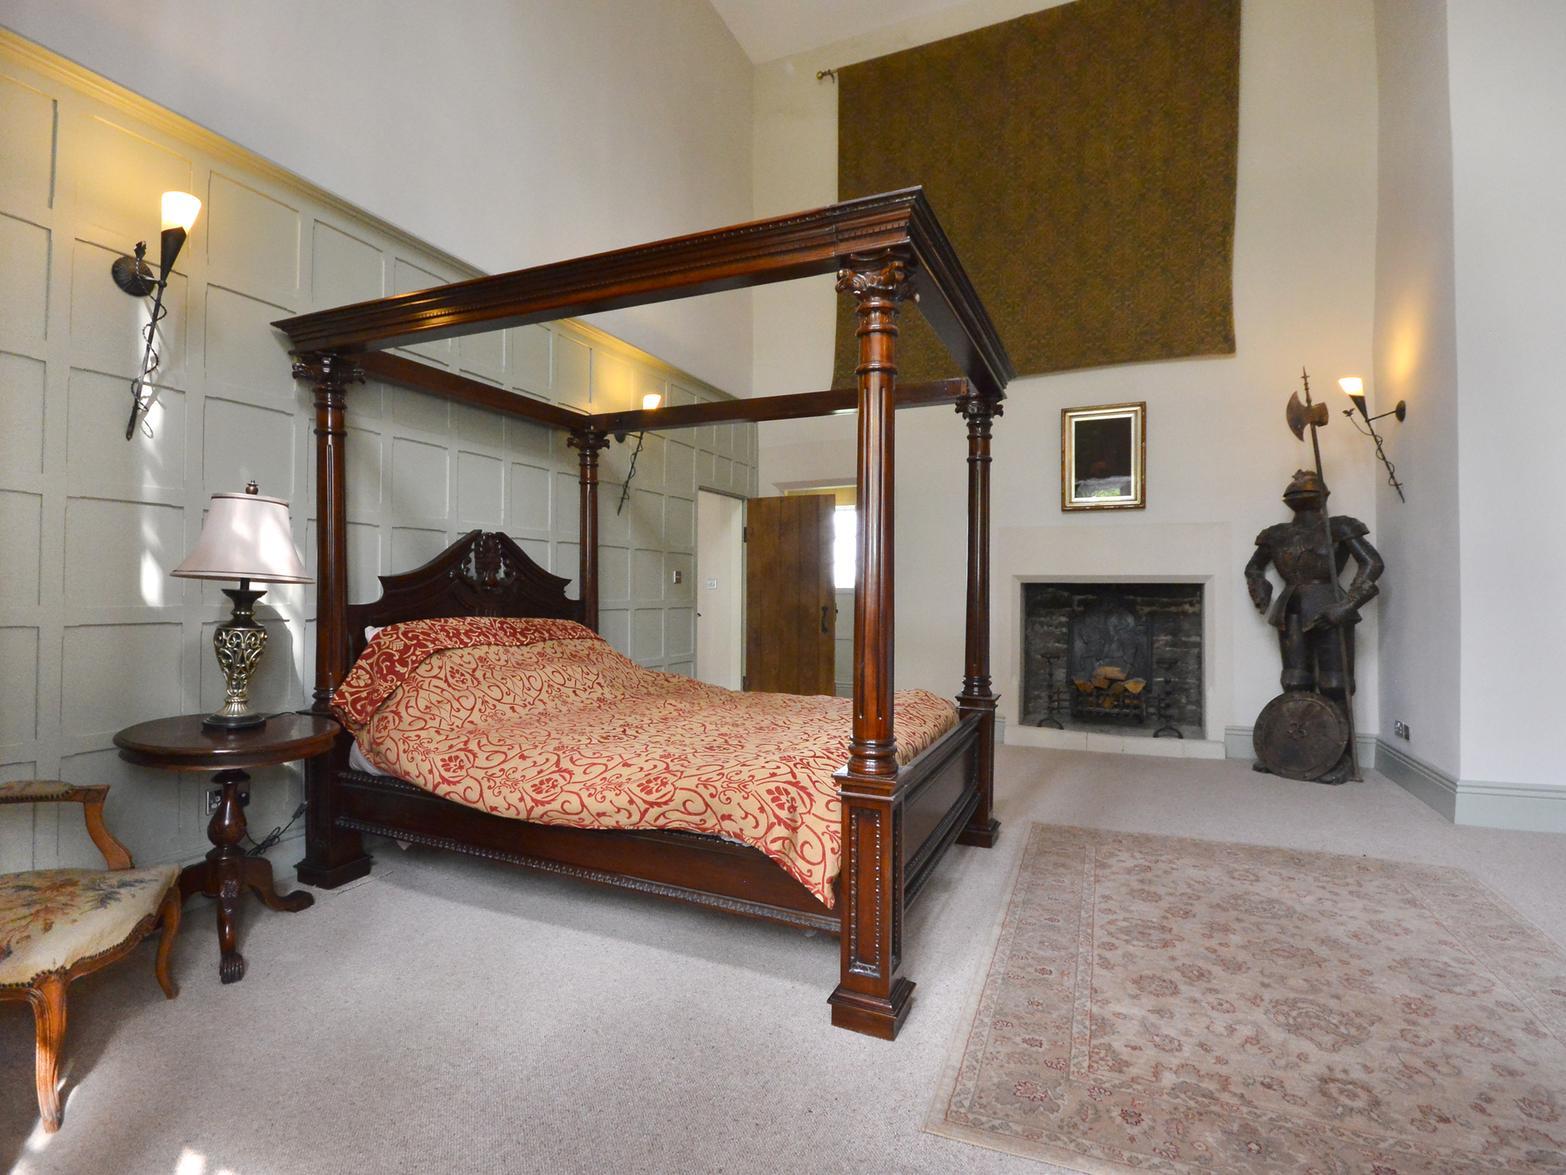 The manor itself has 10 separate bedrooms, and the current owners believe it has potential as a commercial venture.